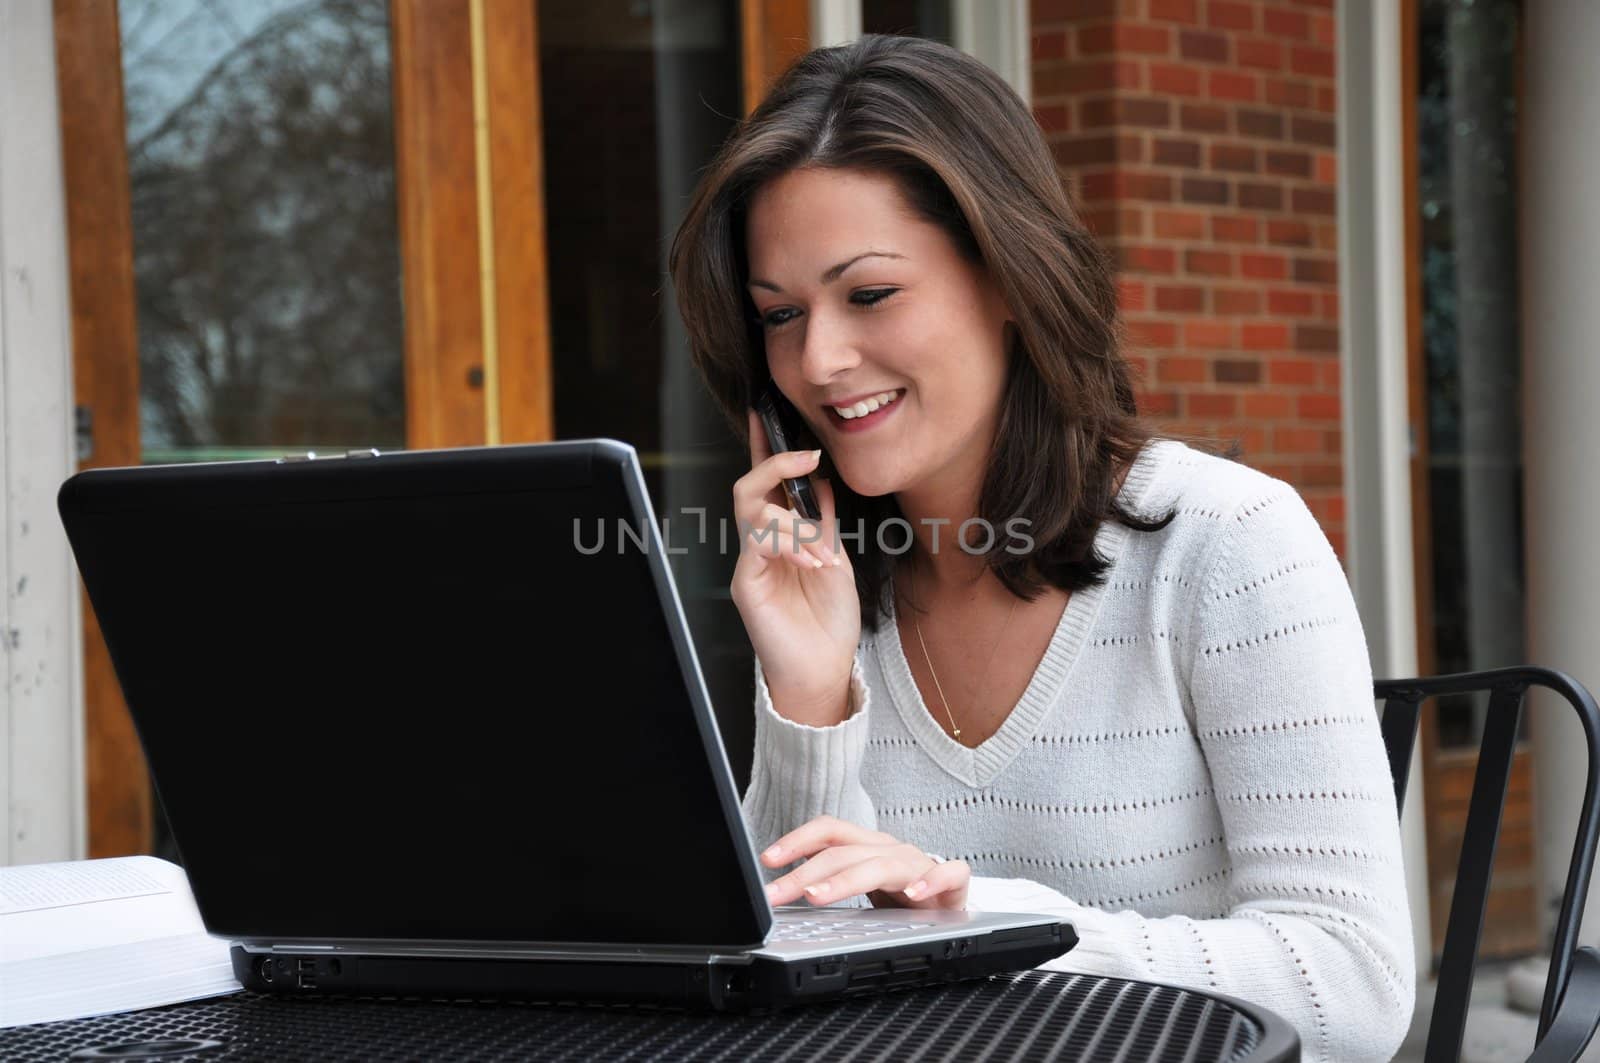 Female Student Using Computer and Cellphone by dehooks